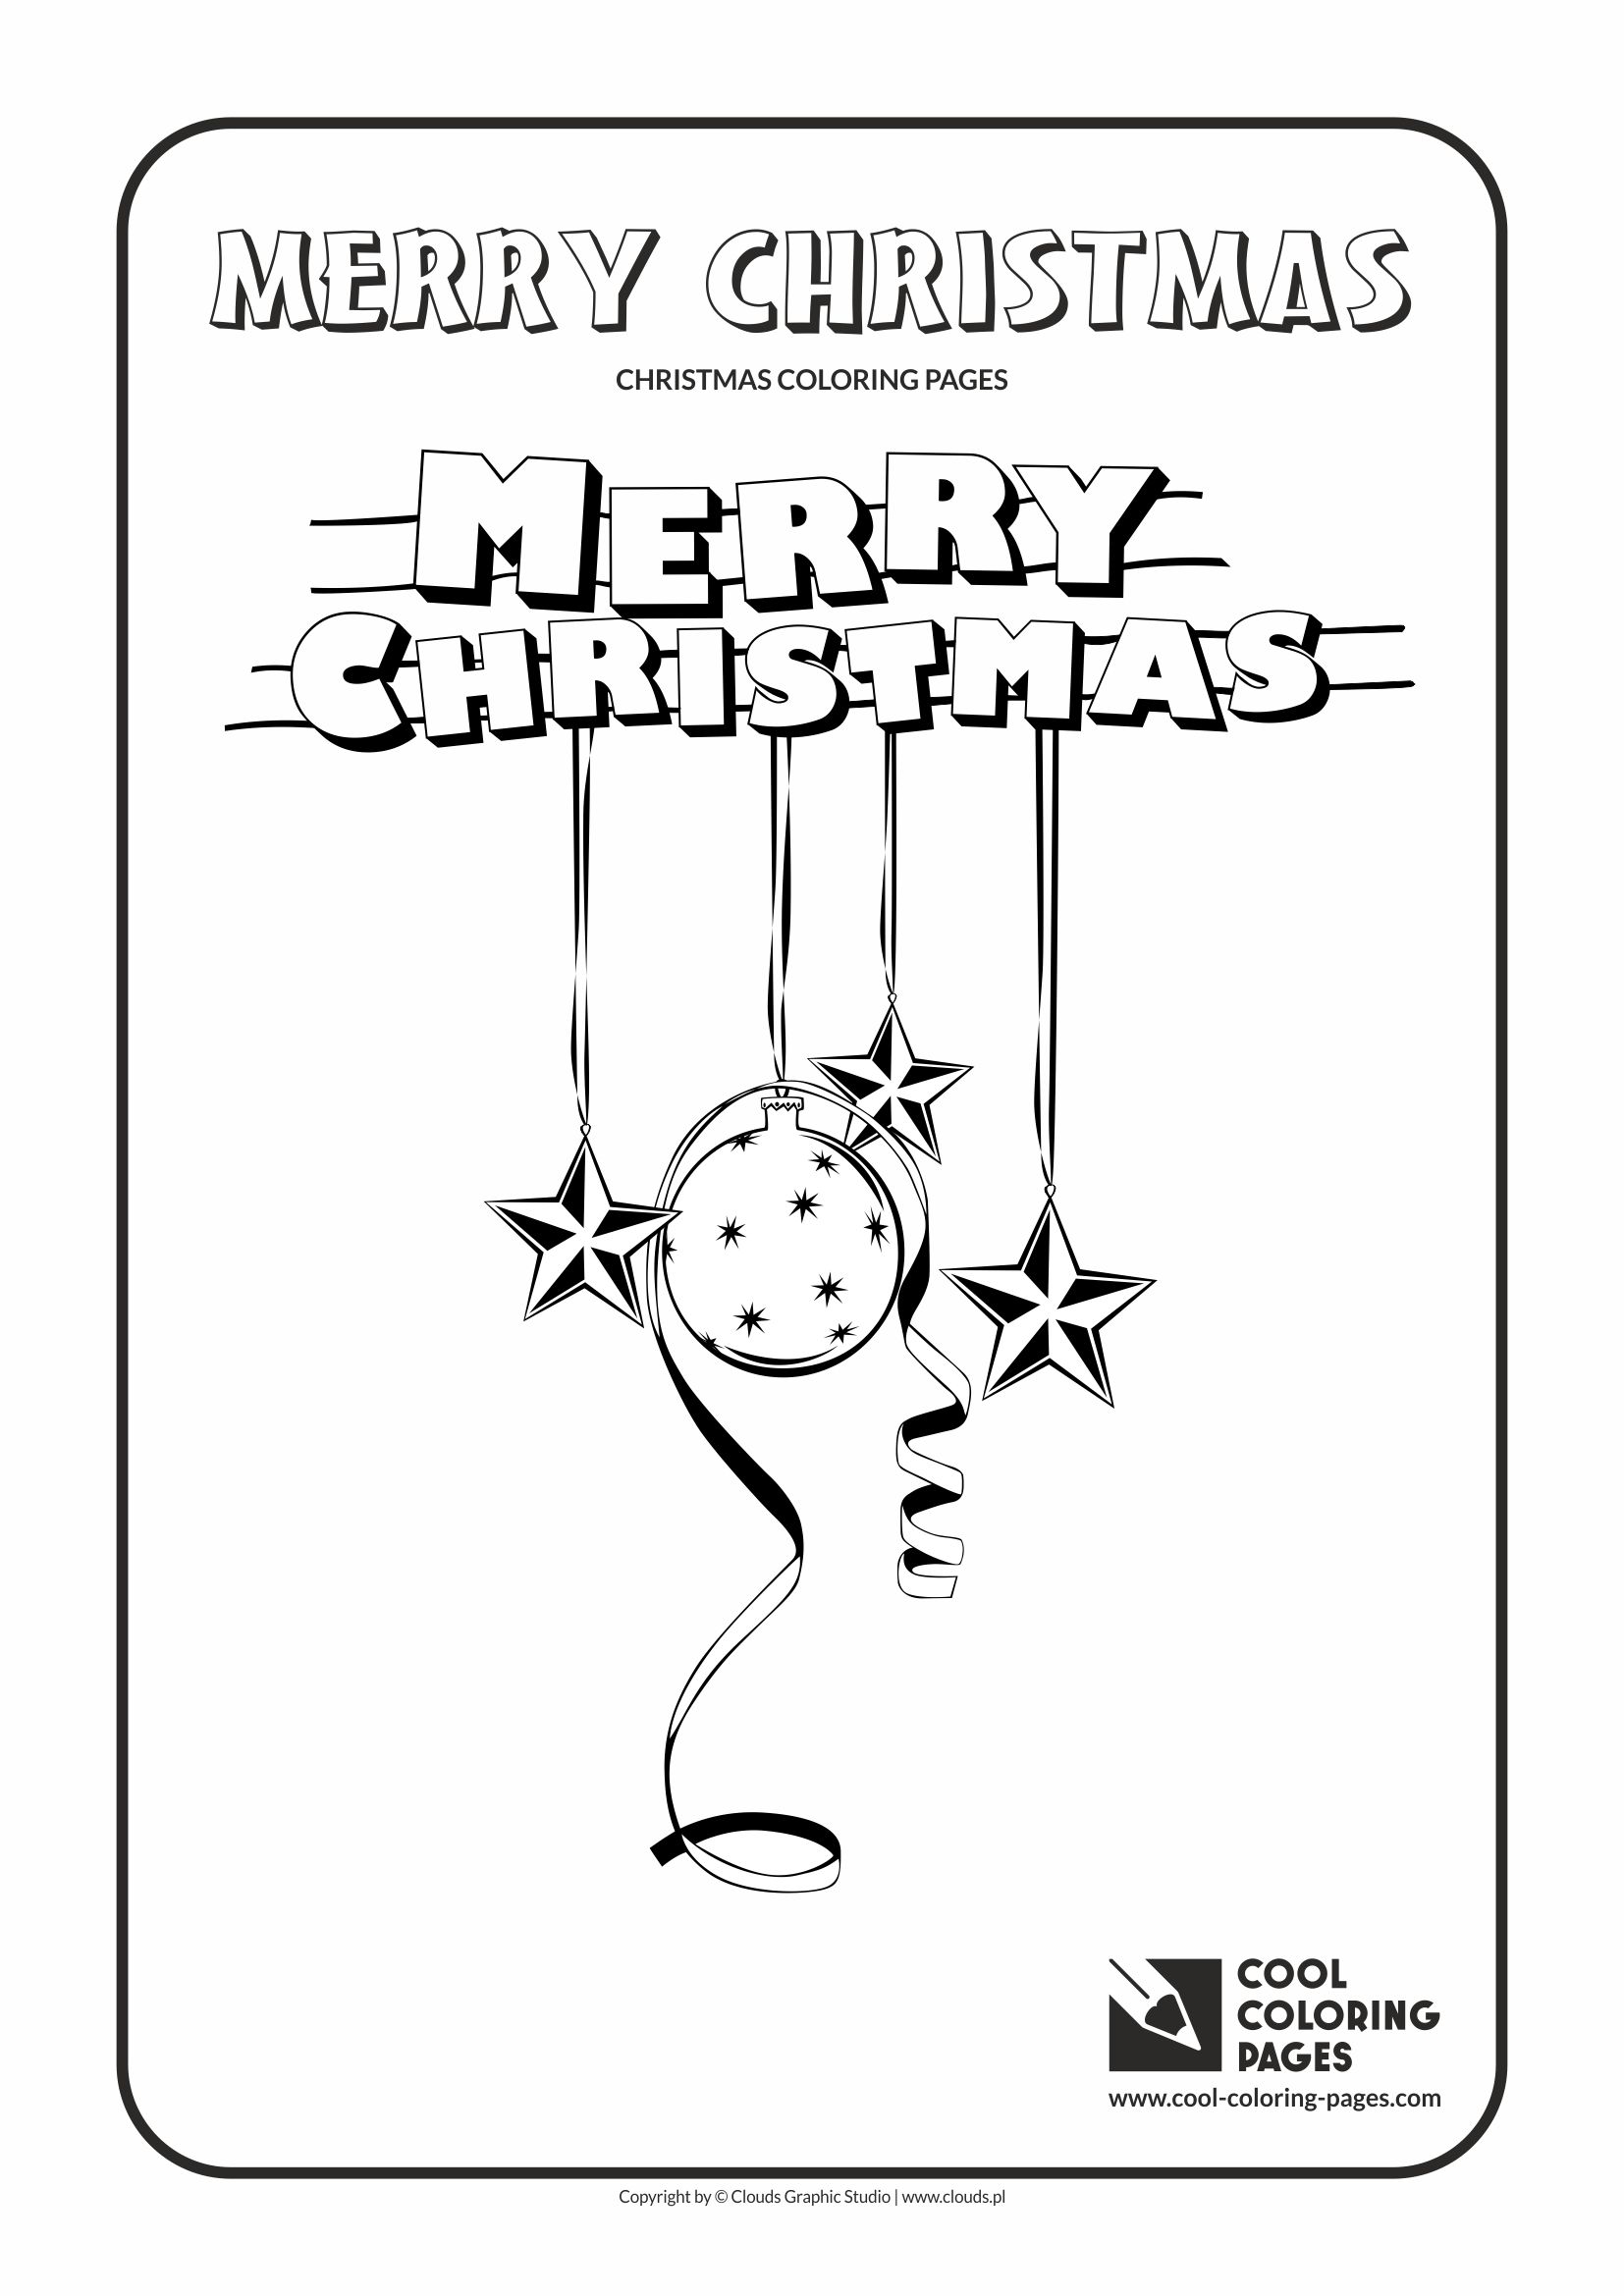 Cool Coloring Pages - Holidays / Merry Christmas no 1 / Coloring page with Merry Christmas no 1